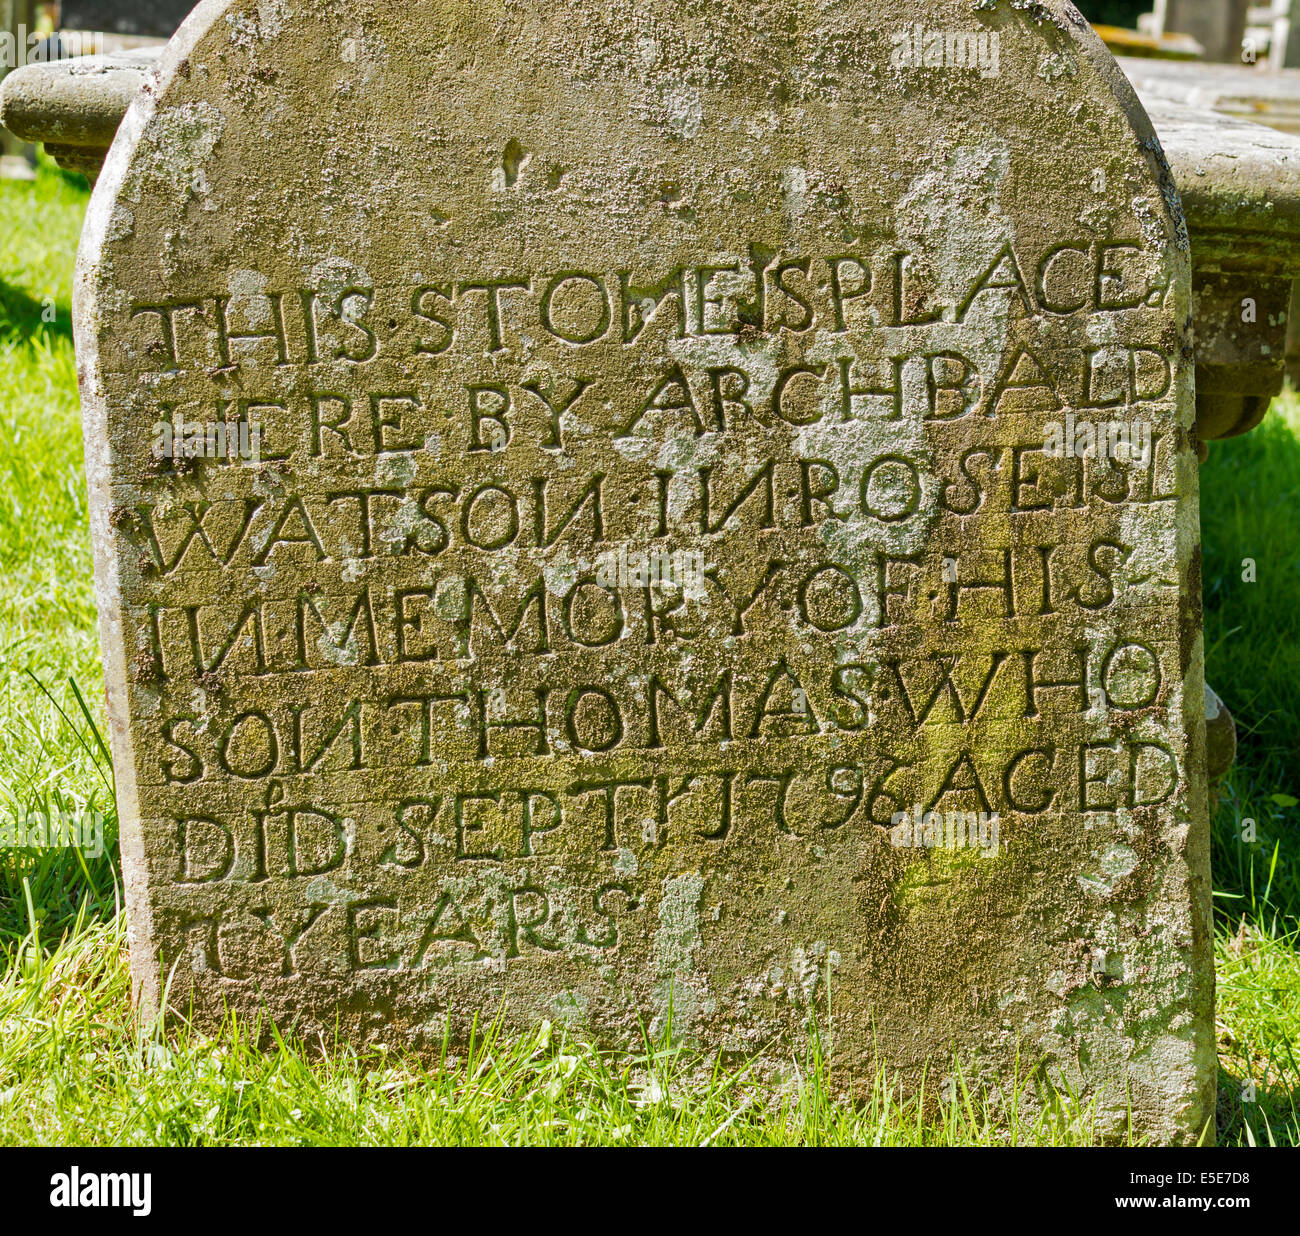 ST.PETER'S KIRK OR CHURCH DUFFUS MORAY POIGNANT TOMBSTONE WITH EVERY N CARVED BACKWARDS AND e ADDED TO TURN DID INTO DIeD Stock Photo